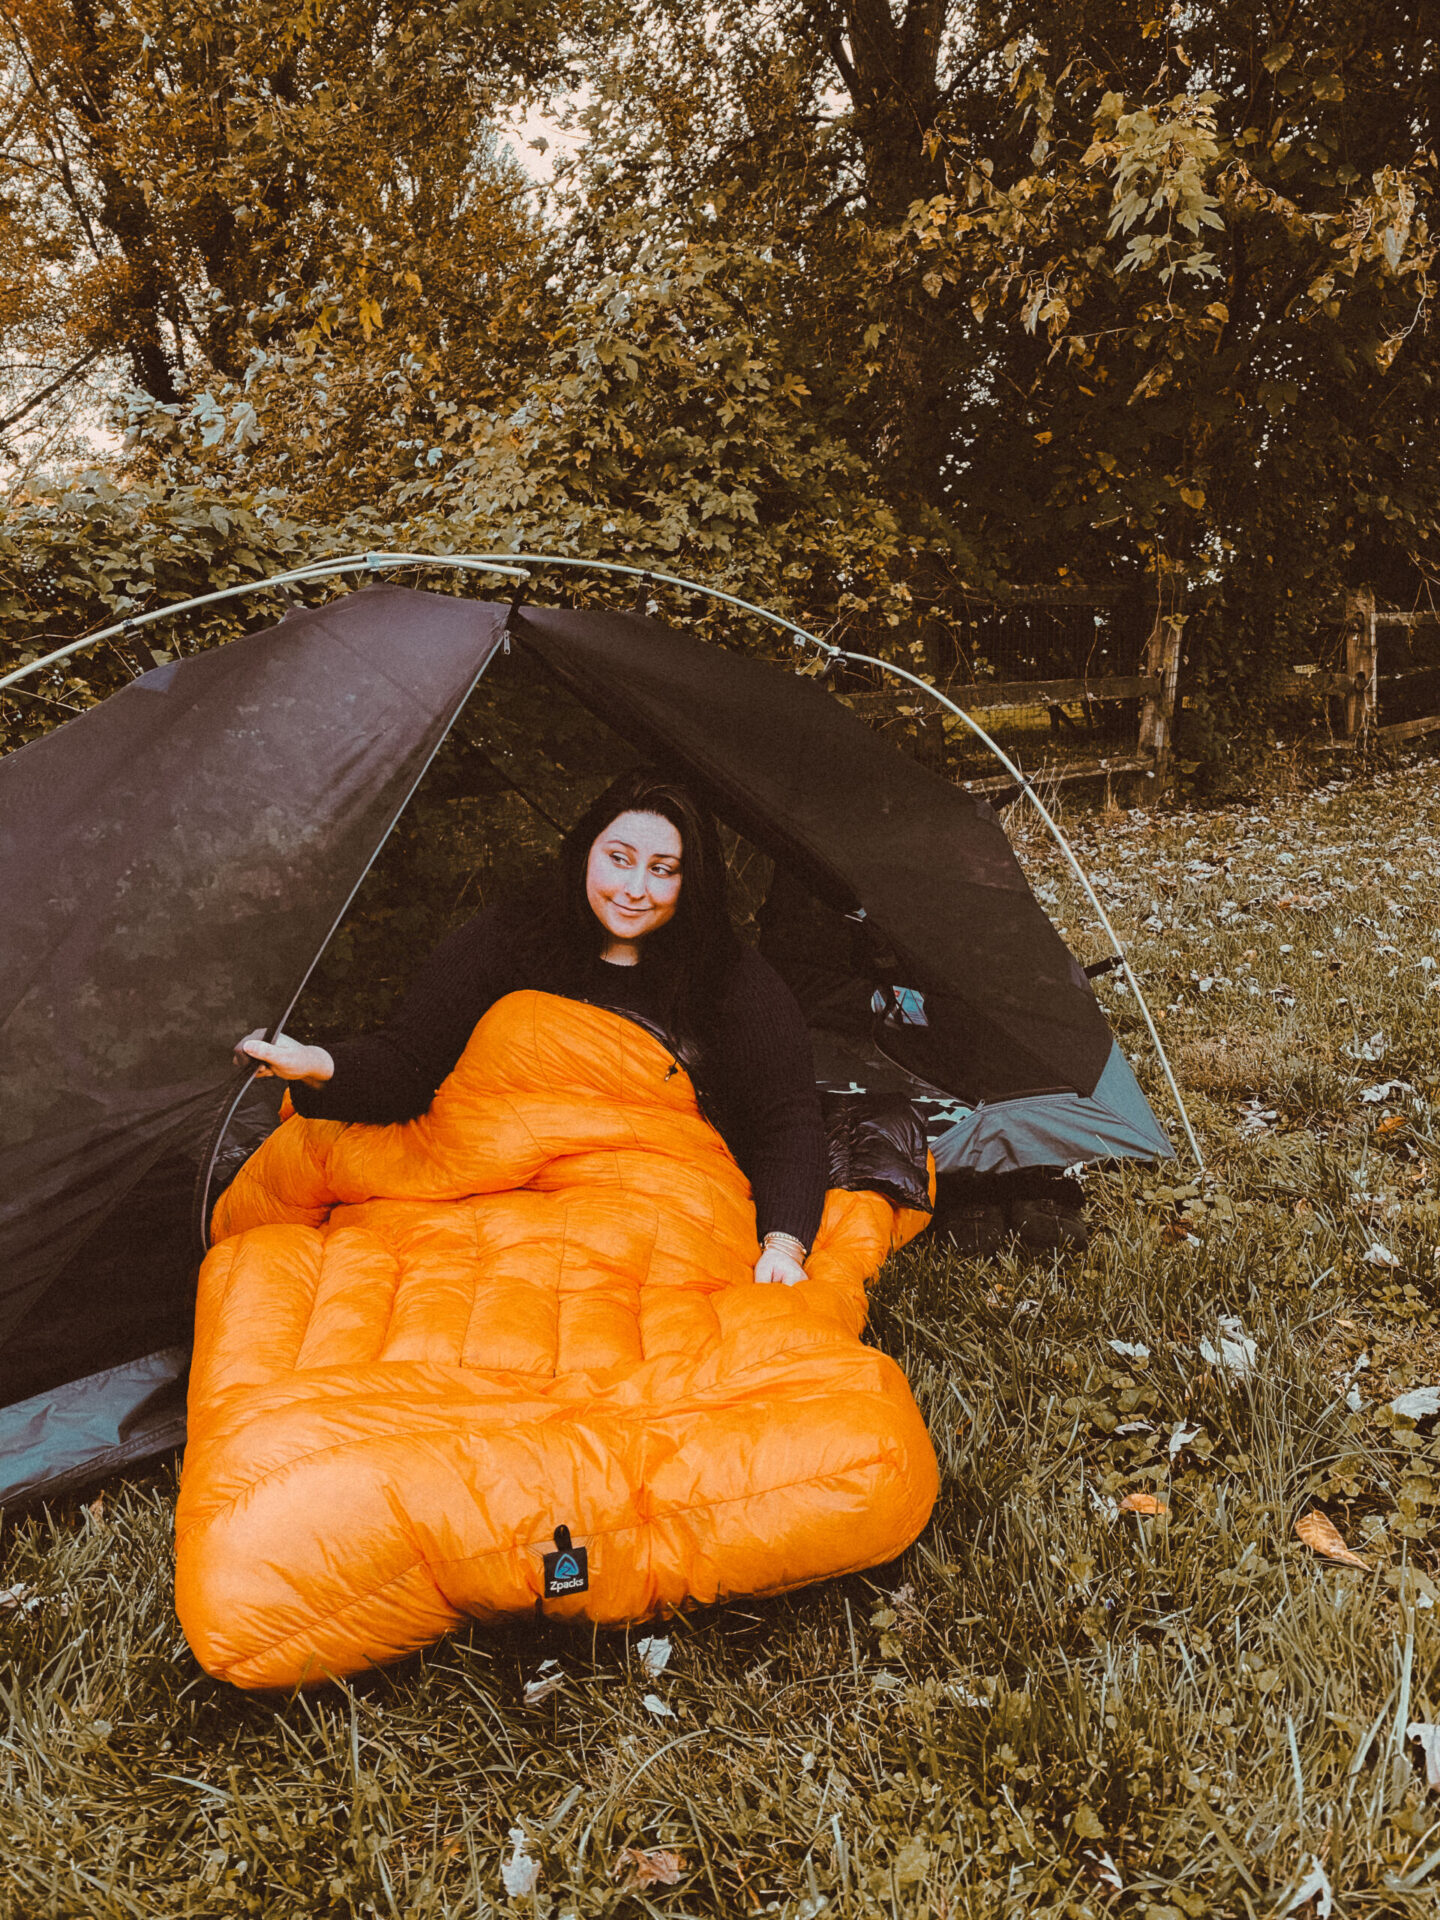 cold weather camping - sleeping bag and tent